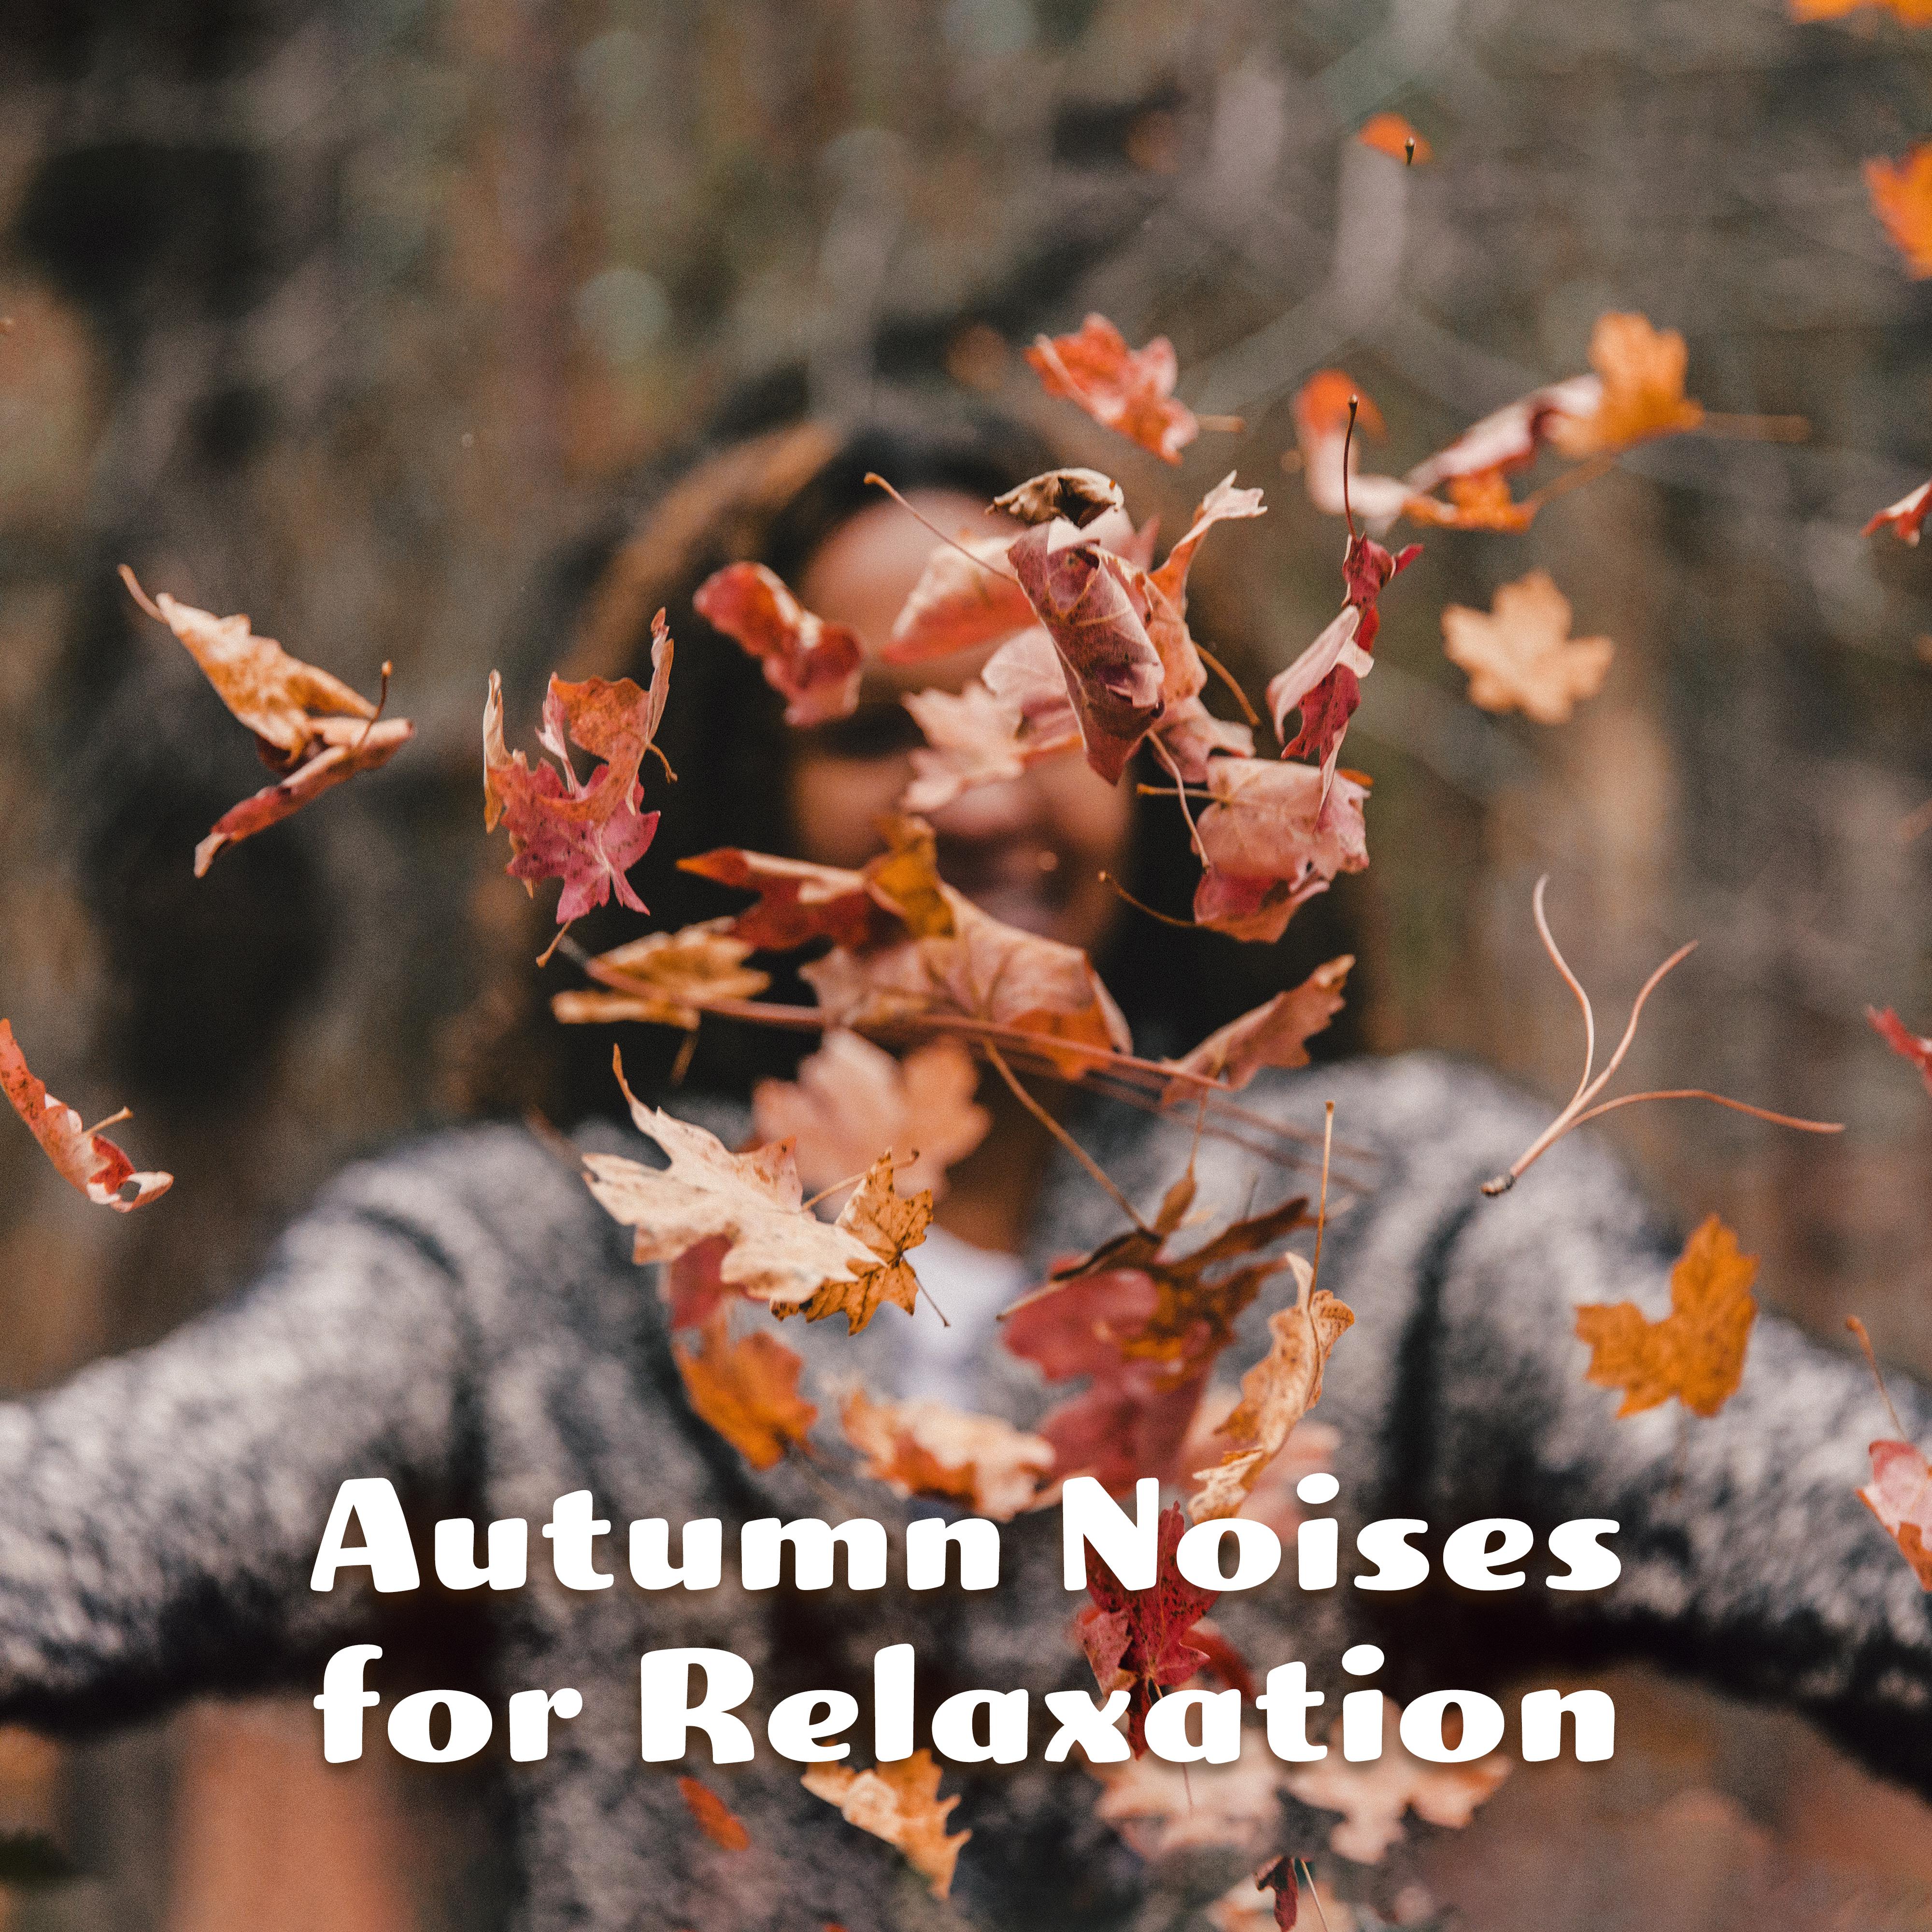 Autumn Noises for Relaxation